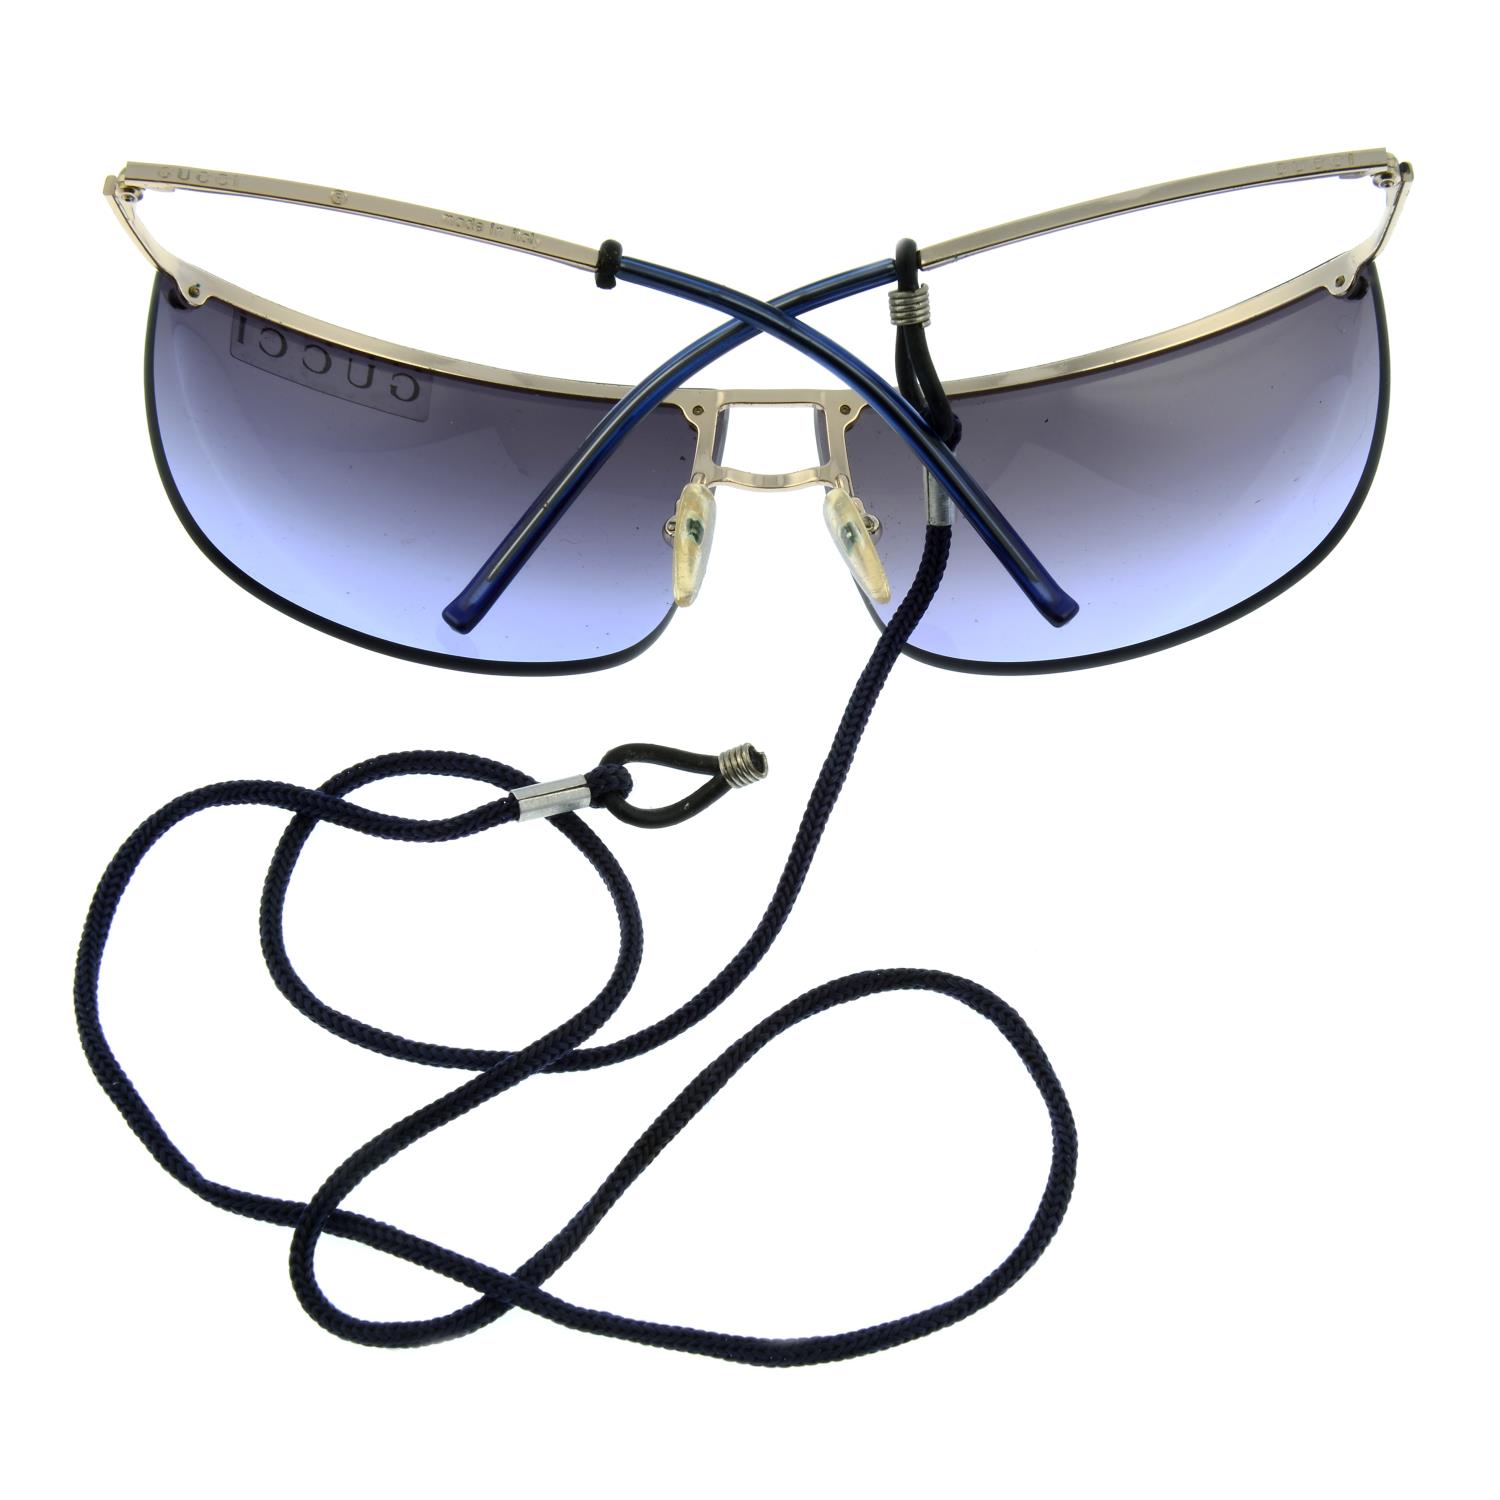 GUCCI - a pair of rimless sunglasses. - Image 2 of 4